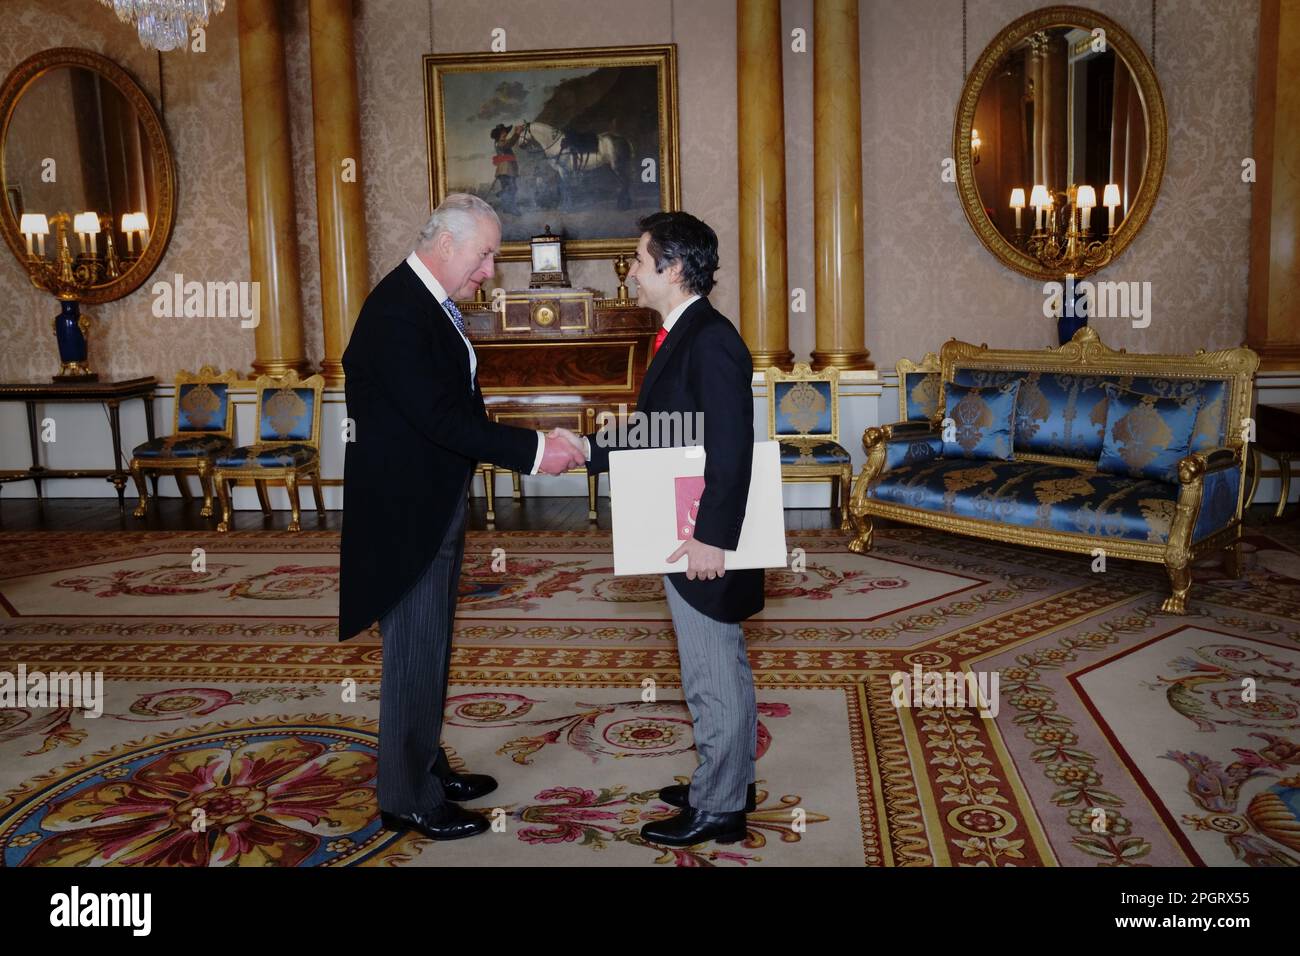 RETRANSMITTING CORRECTING NAME OF AMBASSADOR King Charles III receives the Ambassador of Turkey, Koray Ertas, as he presents his credentials during a private audience at Buckingham Palace, London. Picture date: Thursday March 23, 2023. Stock Photo